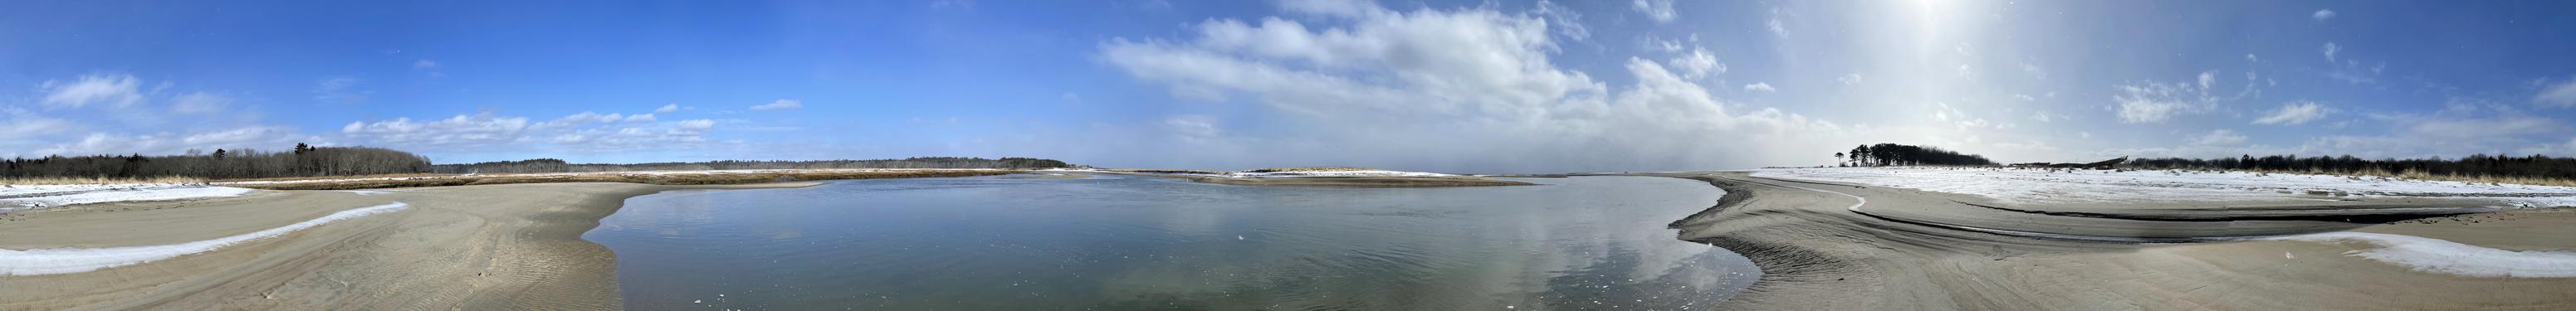 360-degree panoramic photo in February from the beach at Wells Reserve at Laudholm in southern Maine